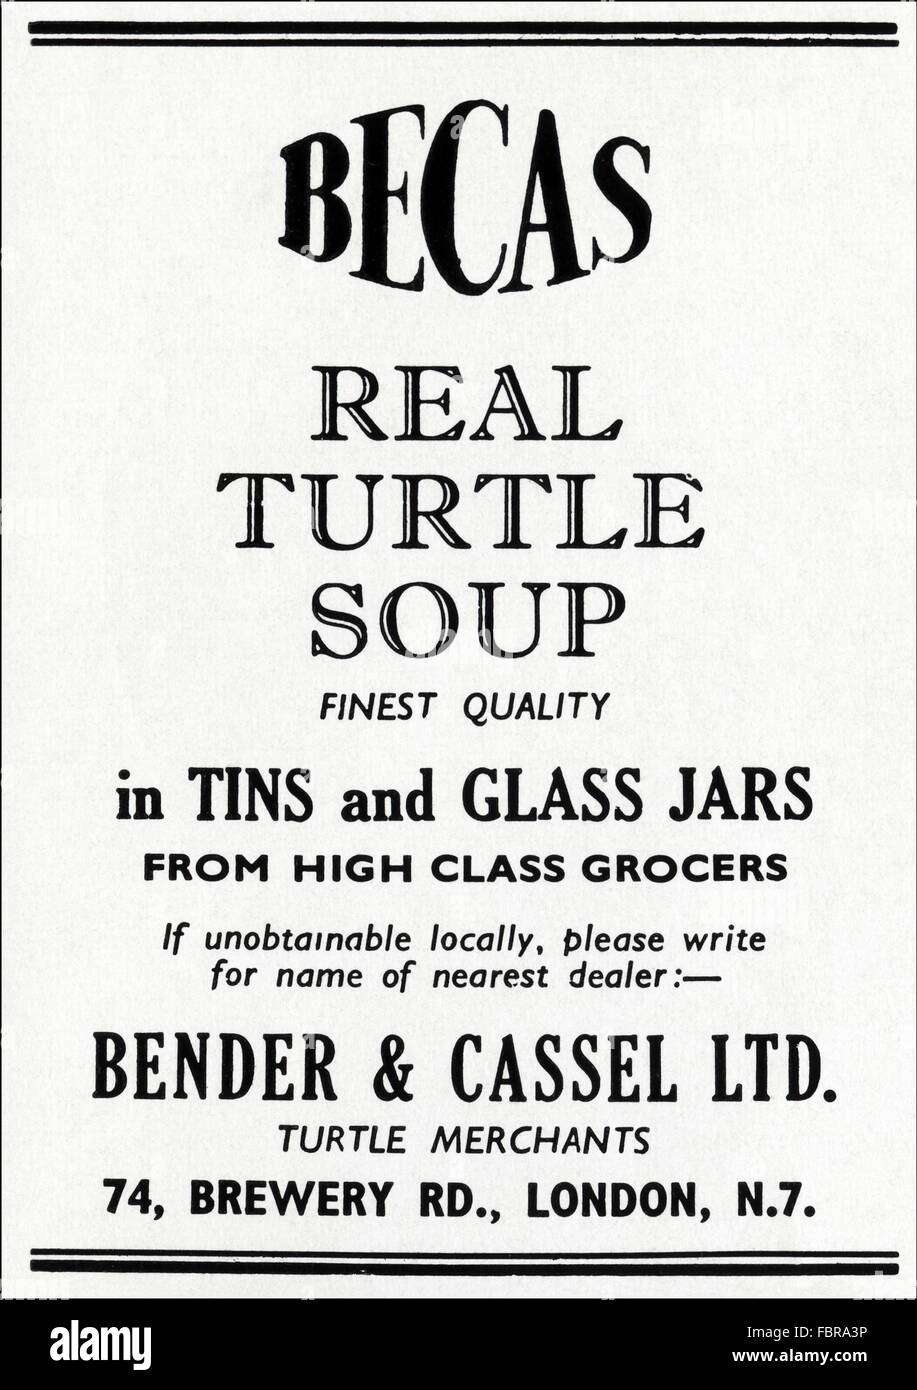 Original vintage advert from 1950s. Advertisement from 1954 advertising Becas real turtle soup by Bender & Cassel Ltd turtle merchants of London. Stock Photo